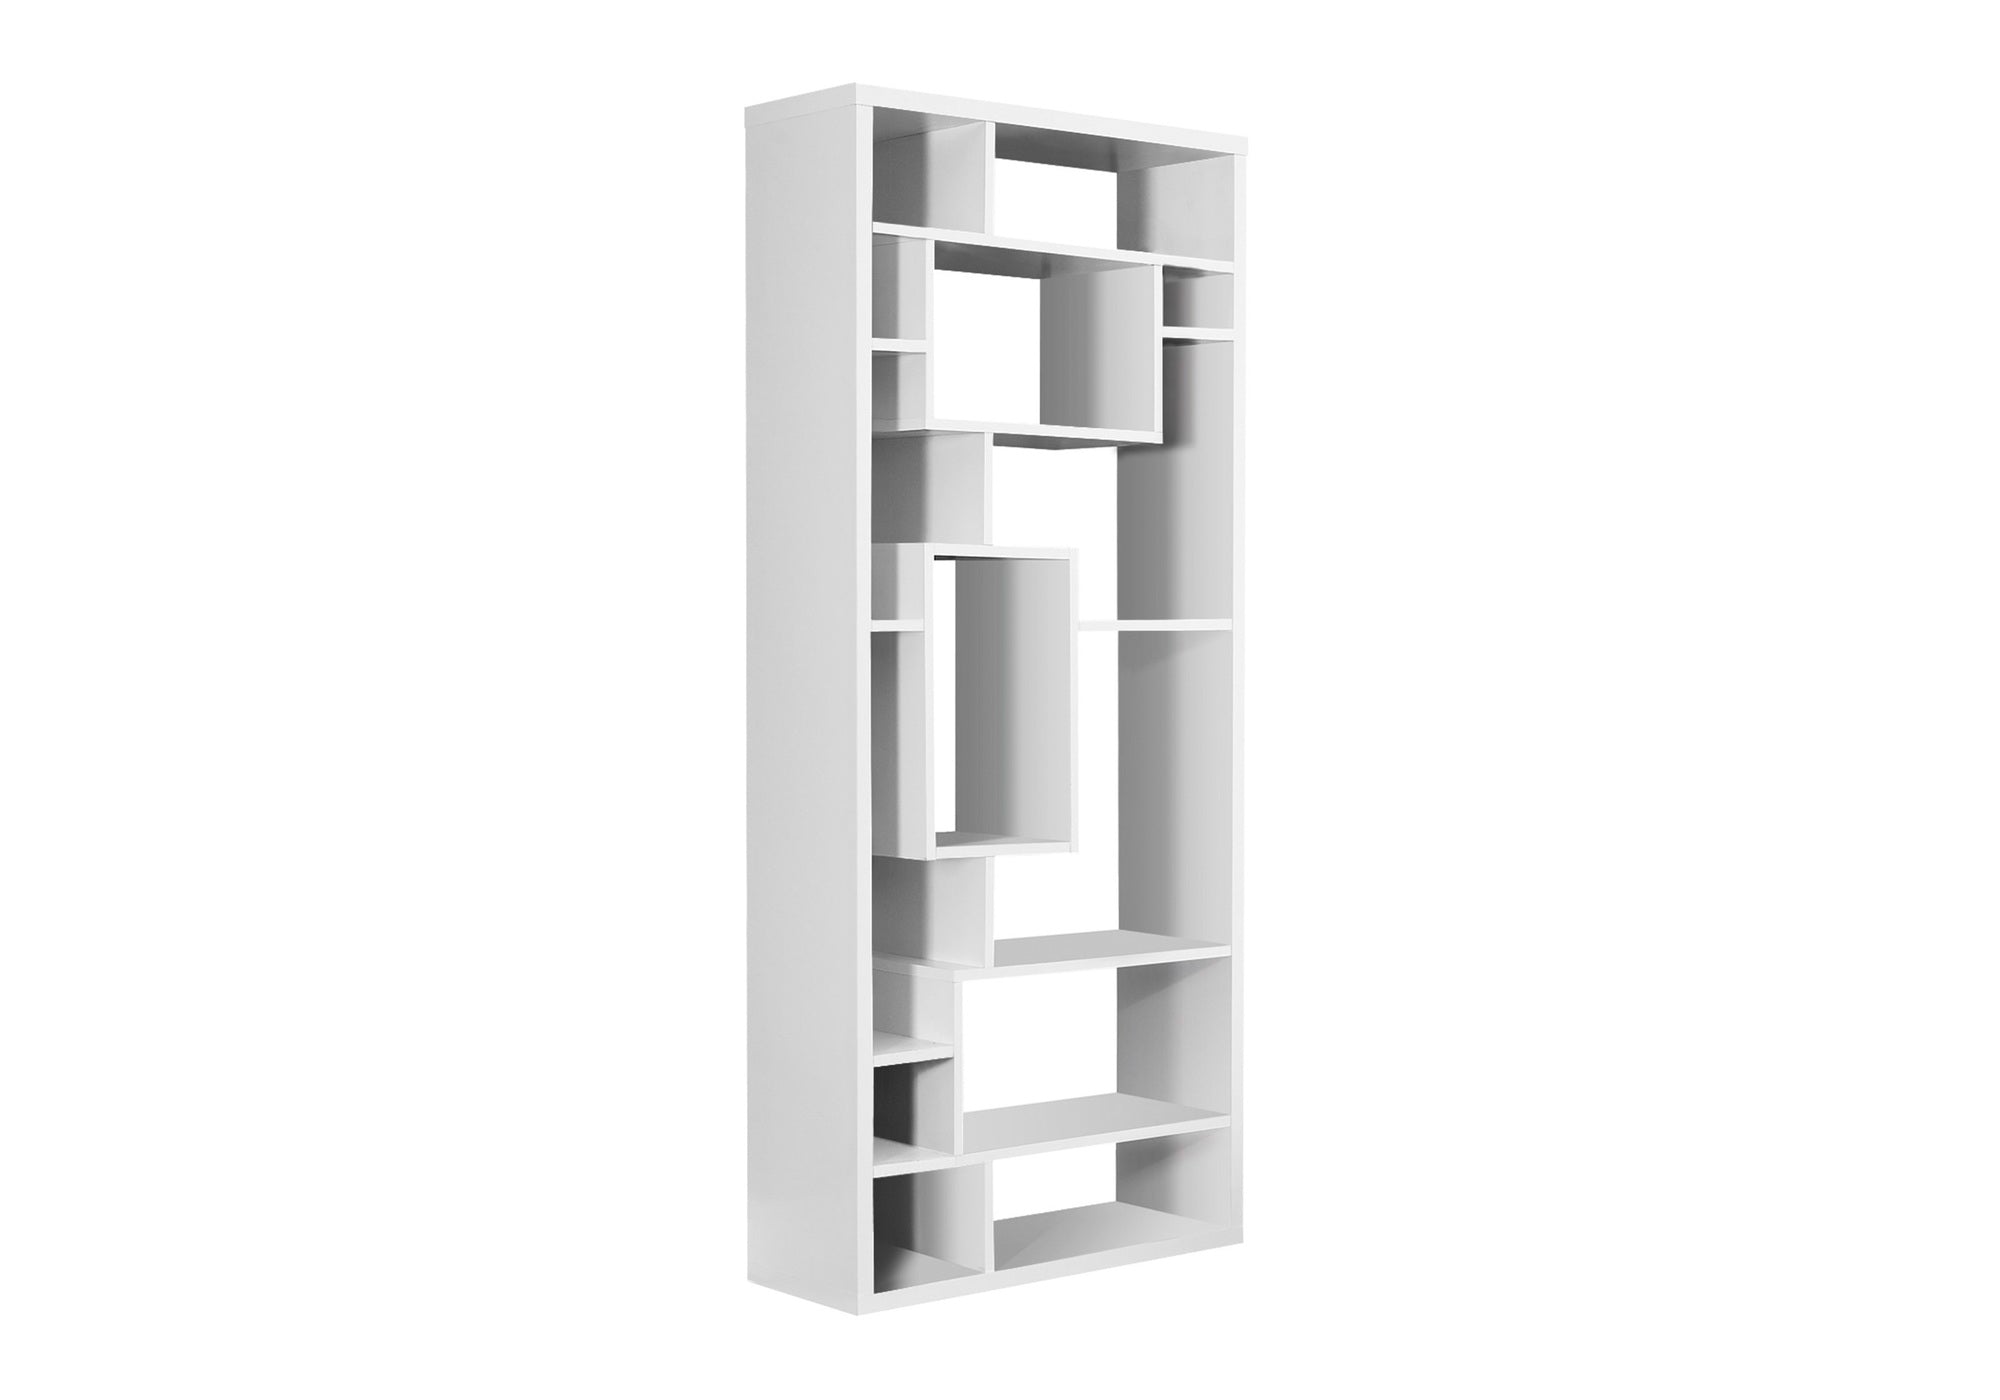 Hollow Core Bookcase Bookshelf With 14 Shelves In White 72" H